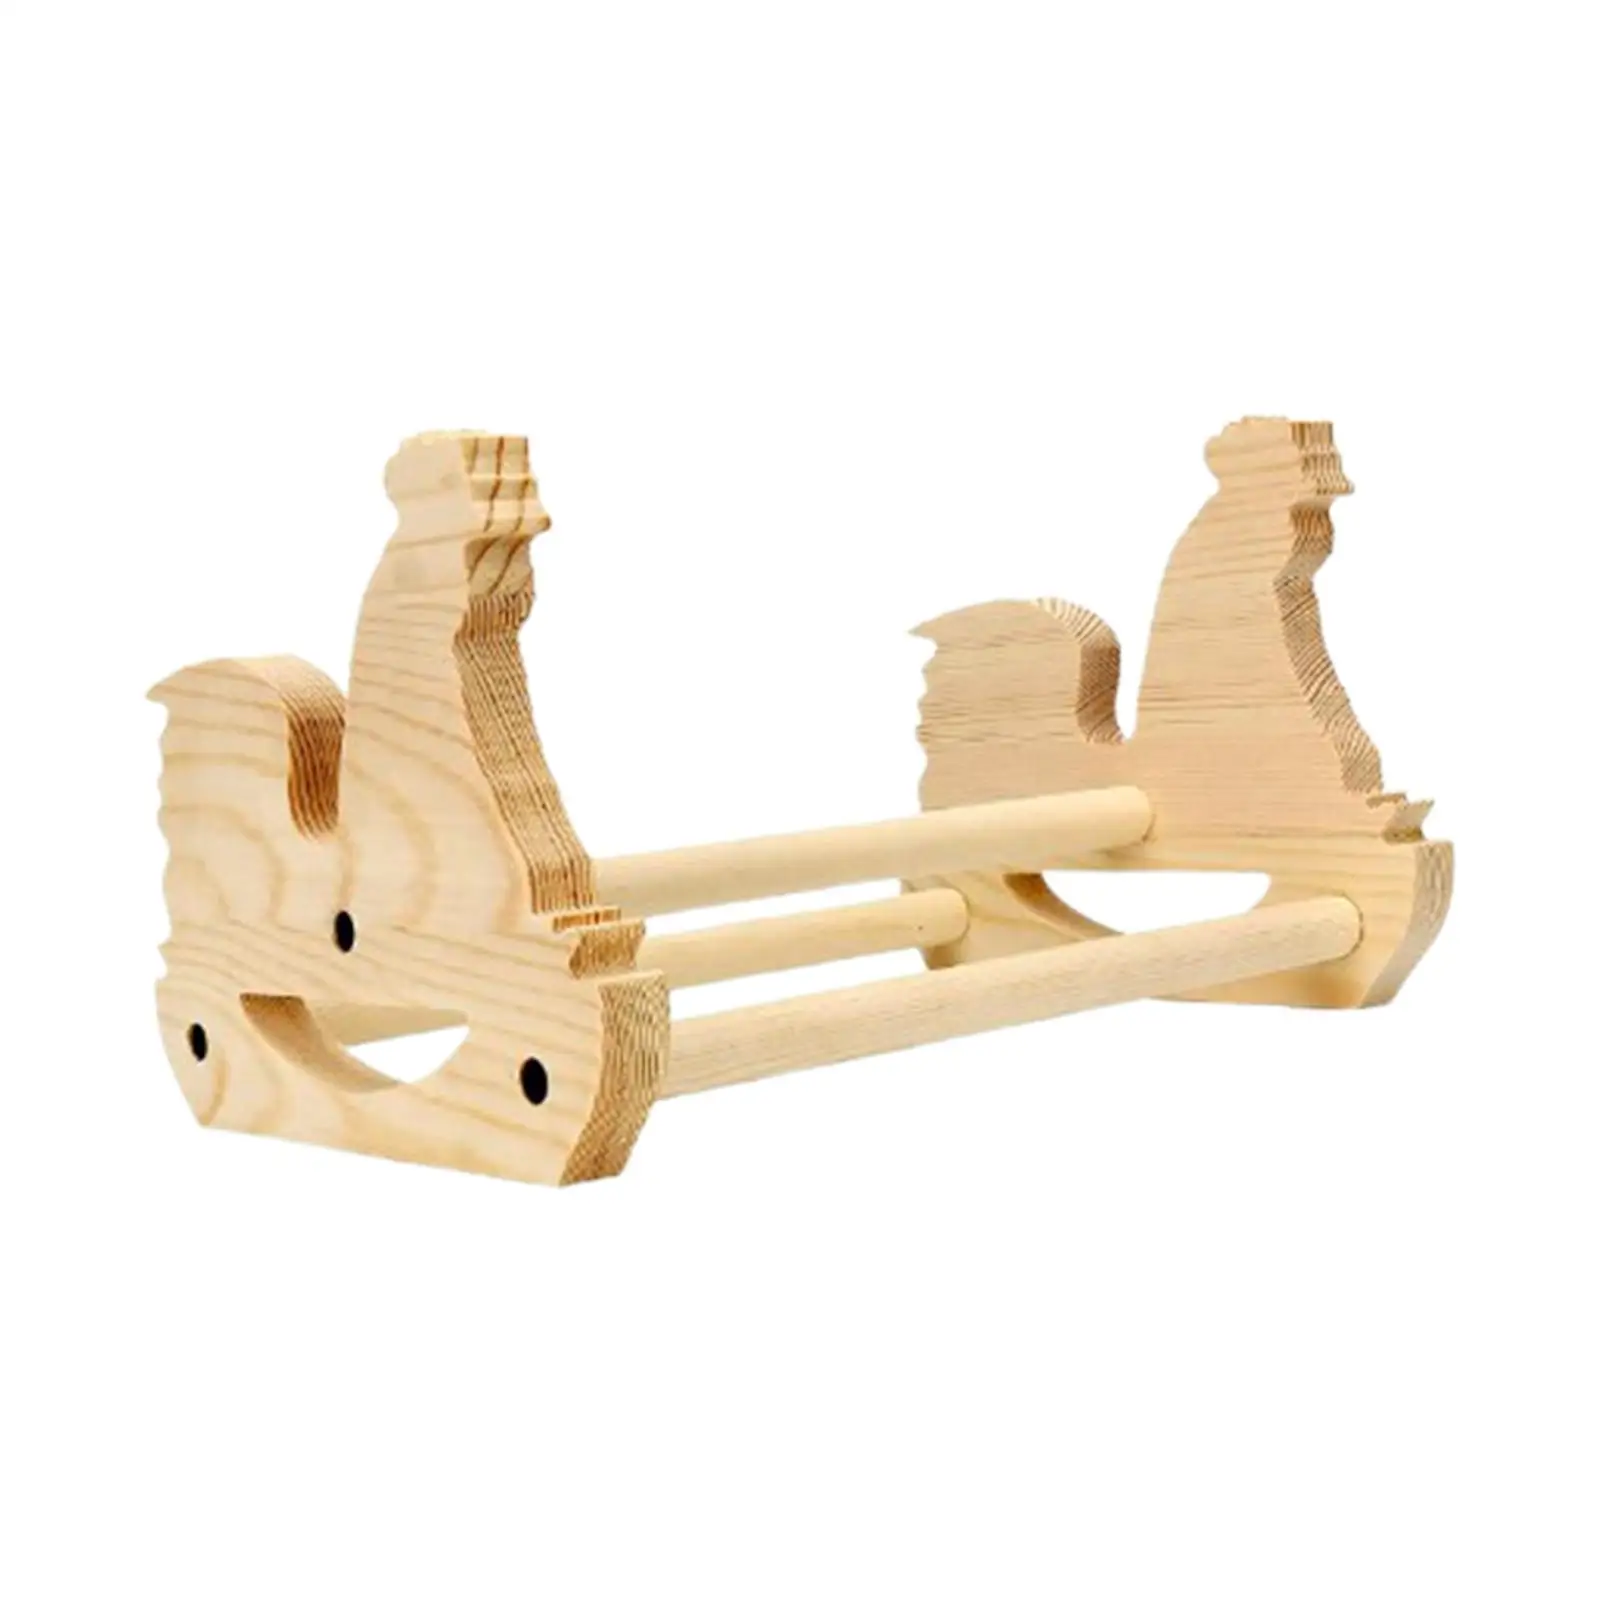 Wood Chick Perch Accessories Exercise Holder Resting Supplies Bird Stand